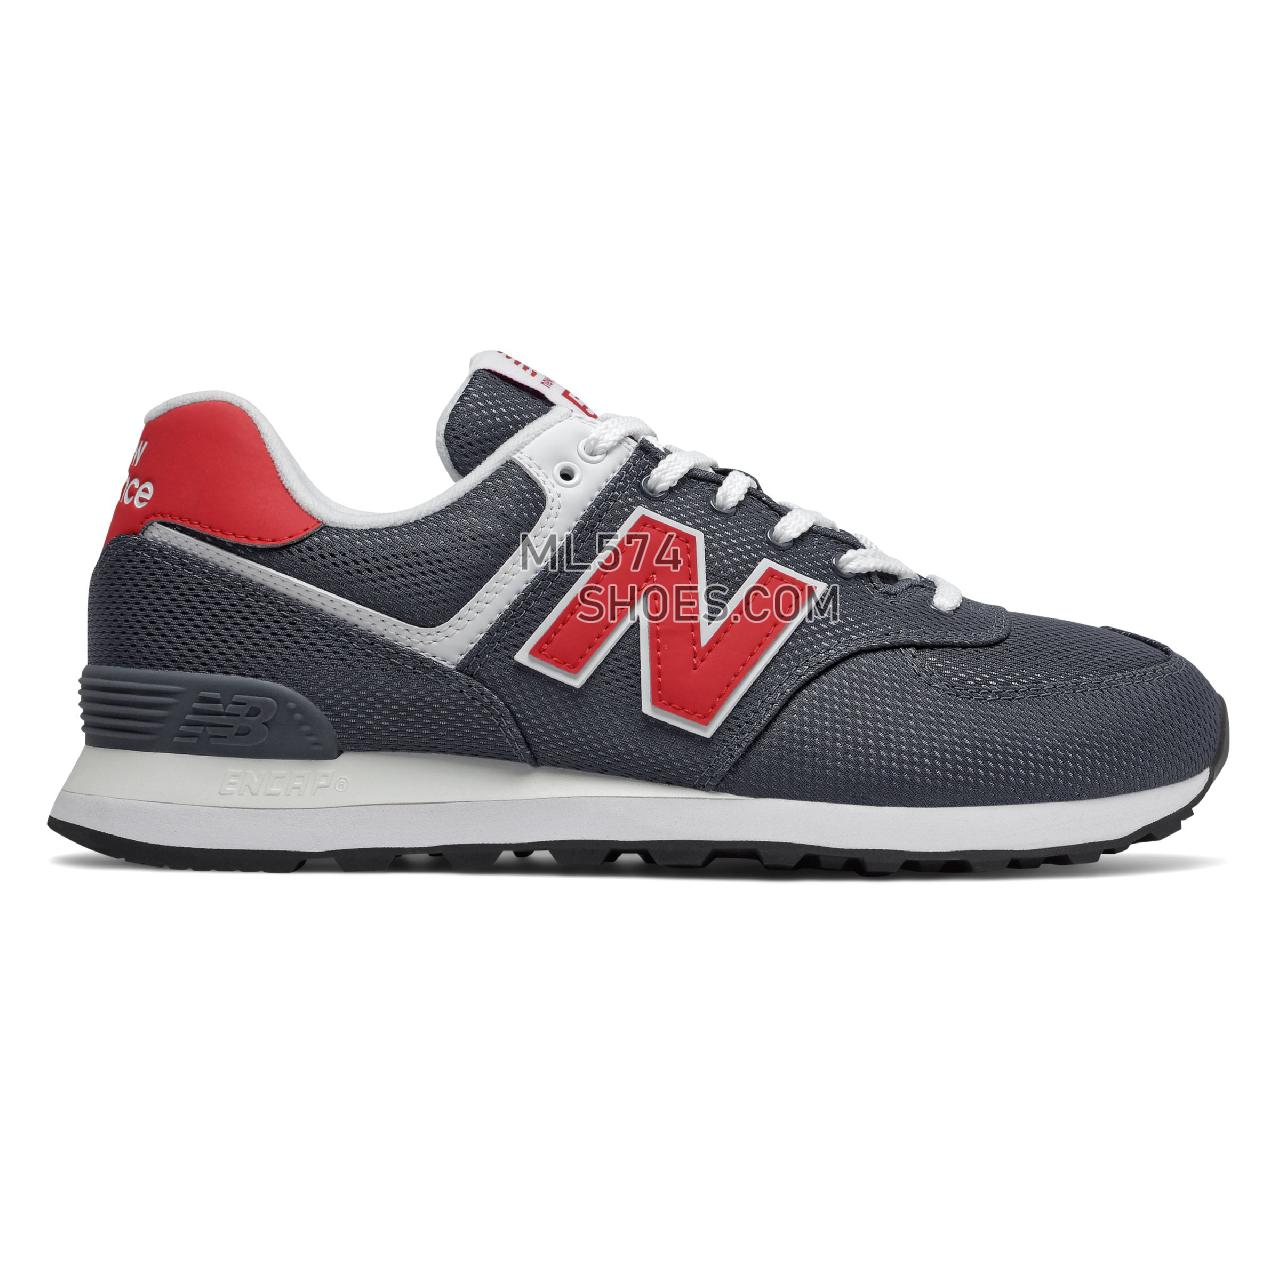 New Balance 574 - Men's Classic Sneakers - Thunder with Team Red - ML574SCJ